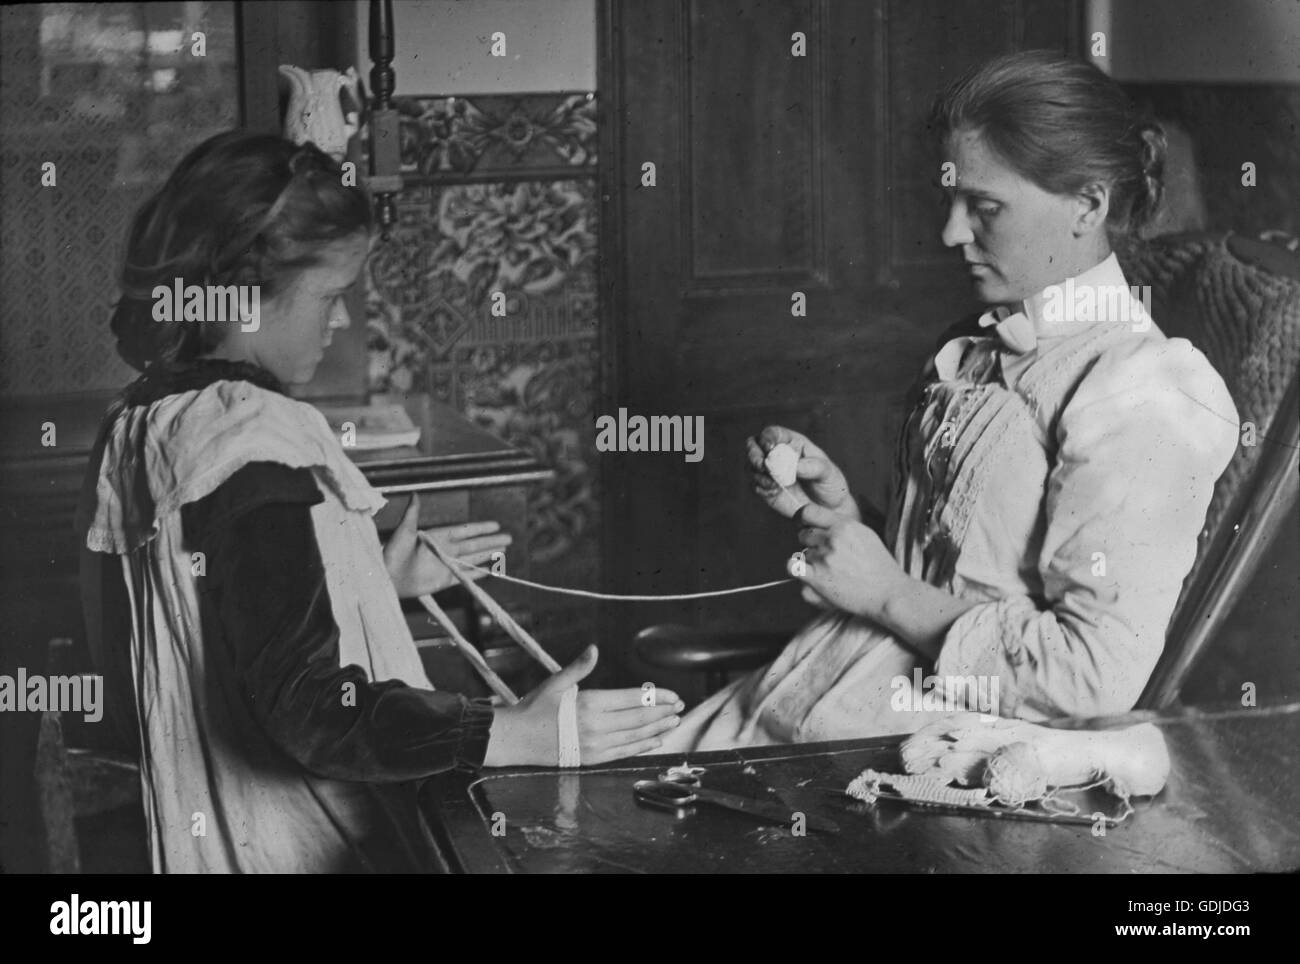 'Home Industry' a girl learning knitting skills. Social history observations labelled Mr W. Frith of Rotherham Photographic Society c1910. Photograph by Tony Henshaw Stock Photo